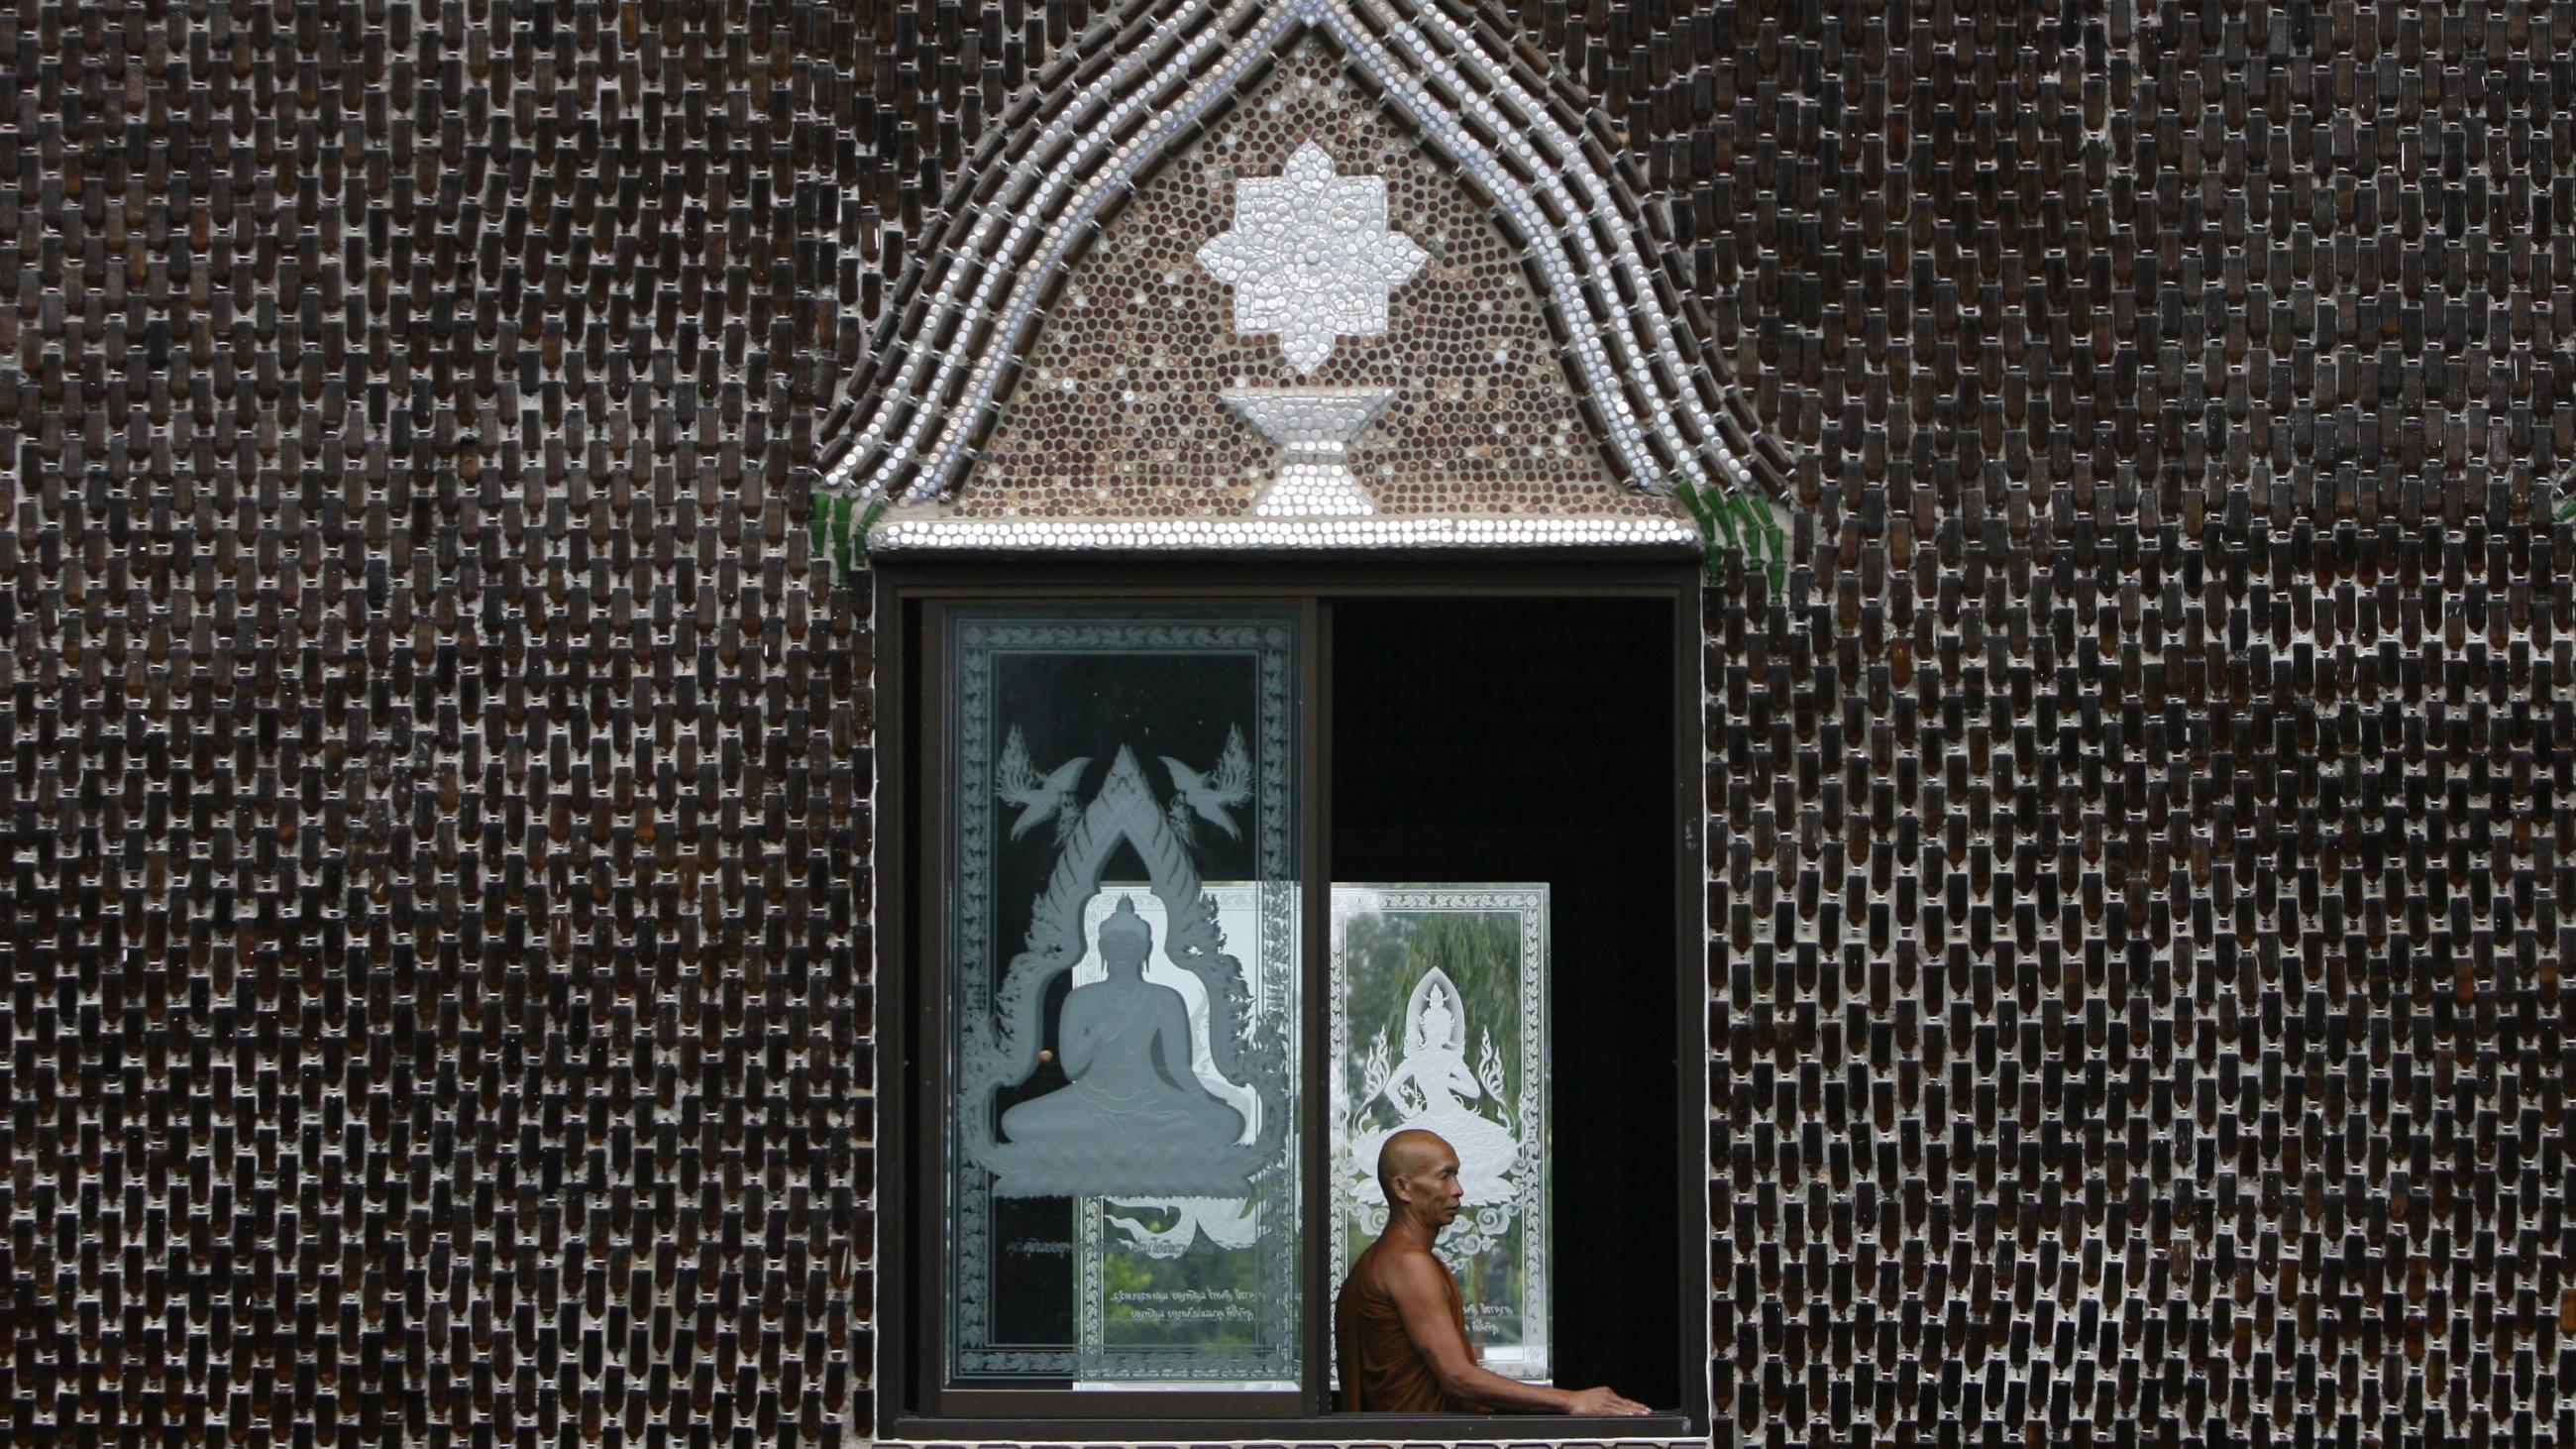 A Buddhist monk looks out of the window of the Wat Pa Maha Chedi Kaew temple, built with more than a million glass bottles